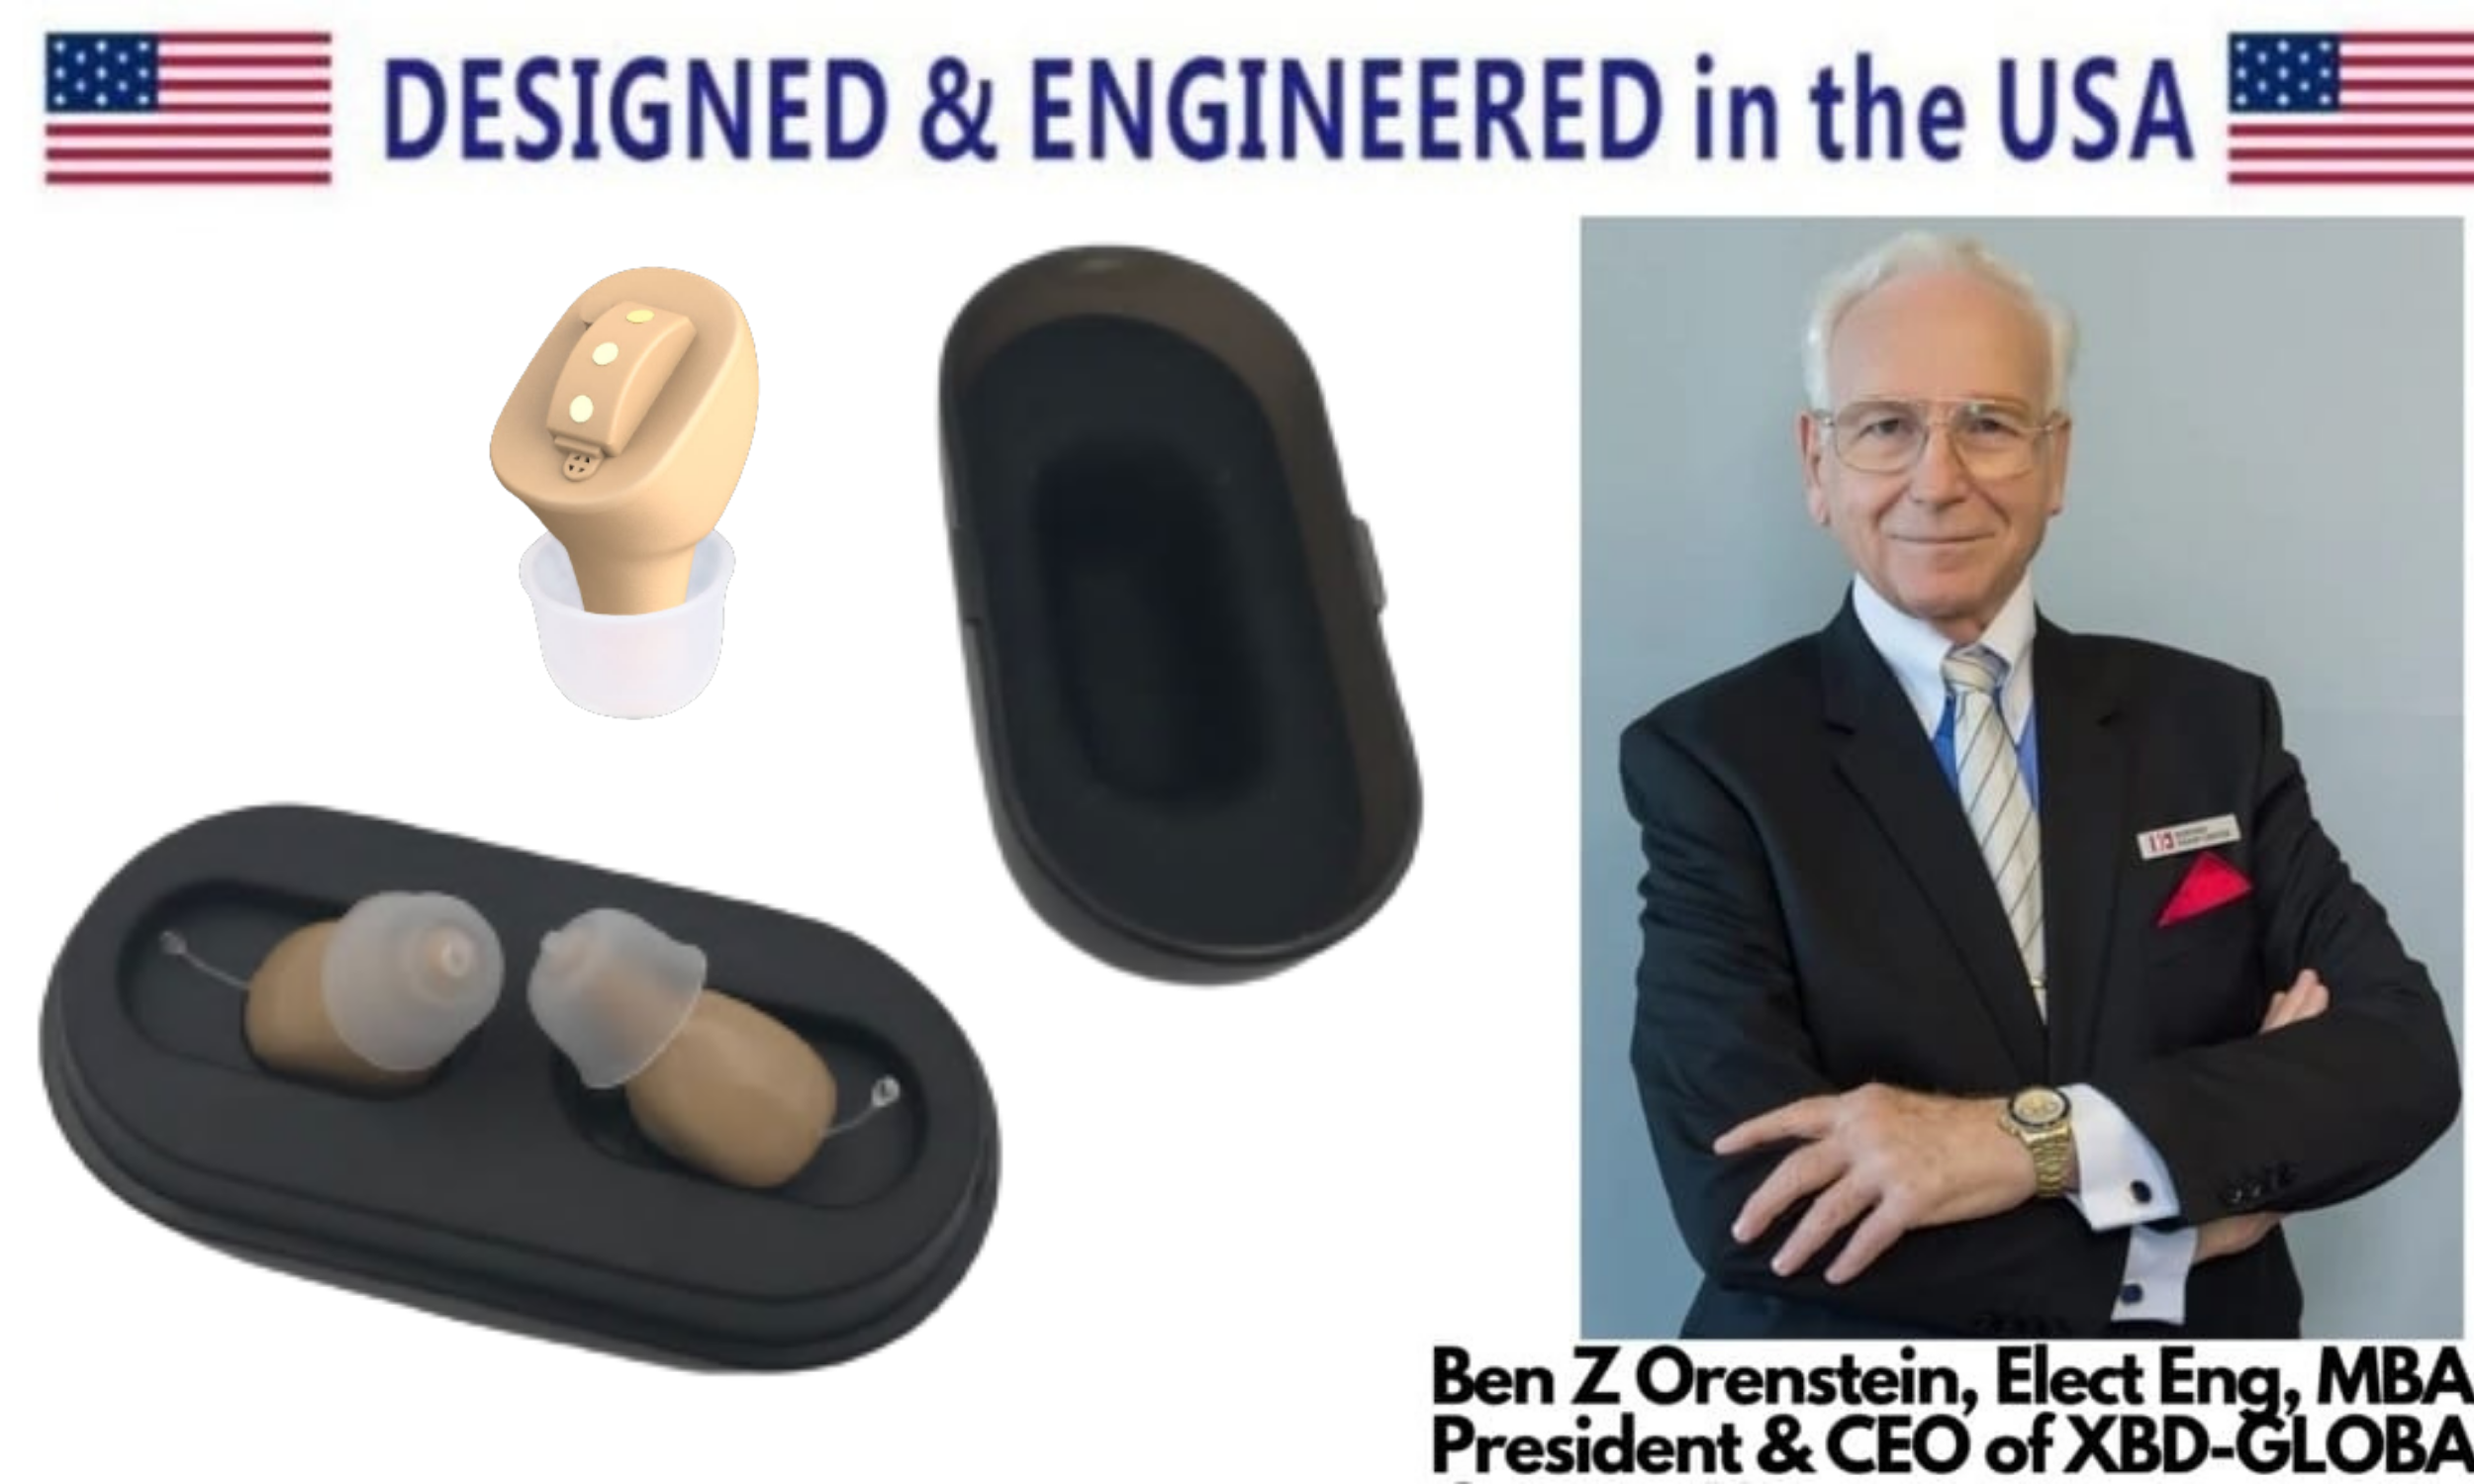 eEAR? ITE-001 Small Pair of Rechargable Hearing Aid Amplifiers Comes with Rechargable charging case hold 5 times full charges Sold 20,000+ worldwide